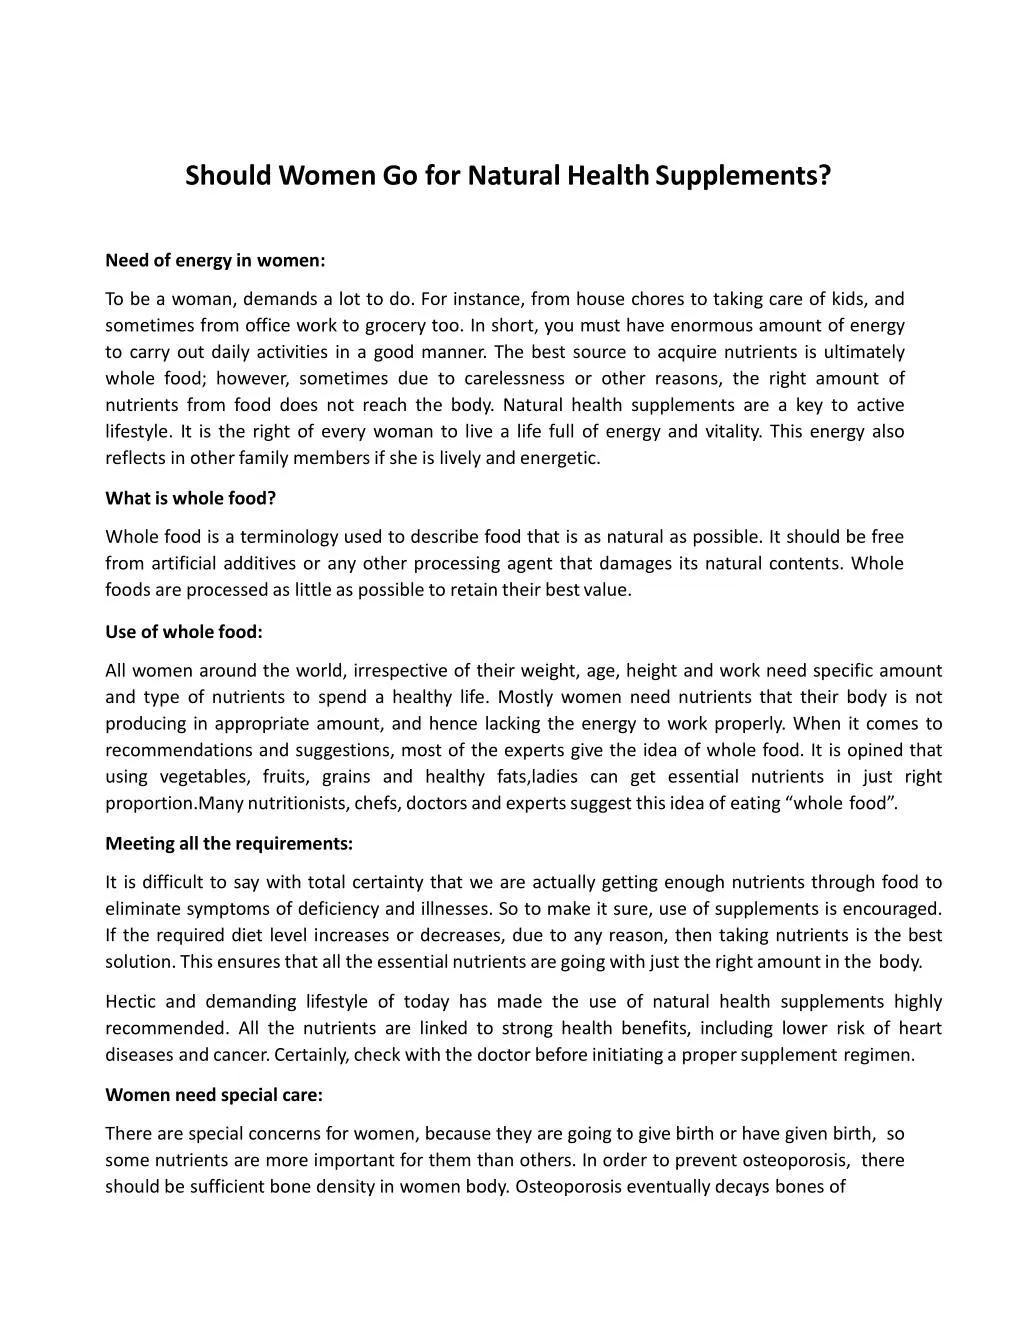 should women go for natural health supplements